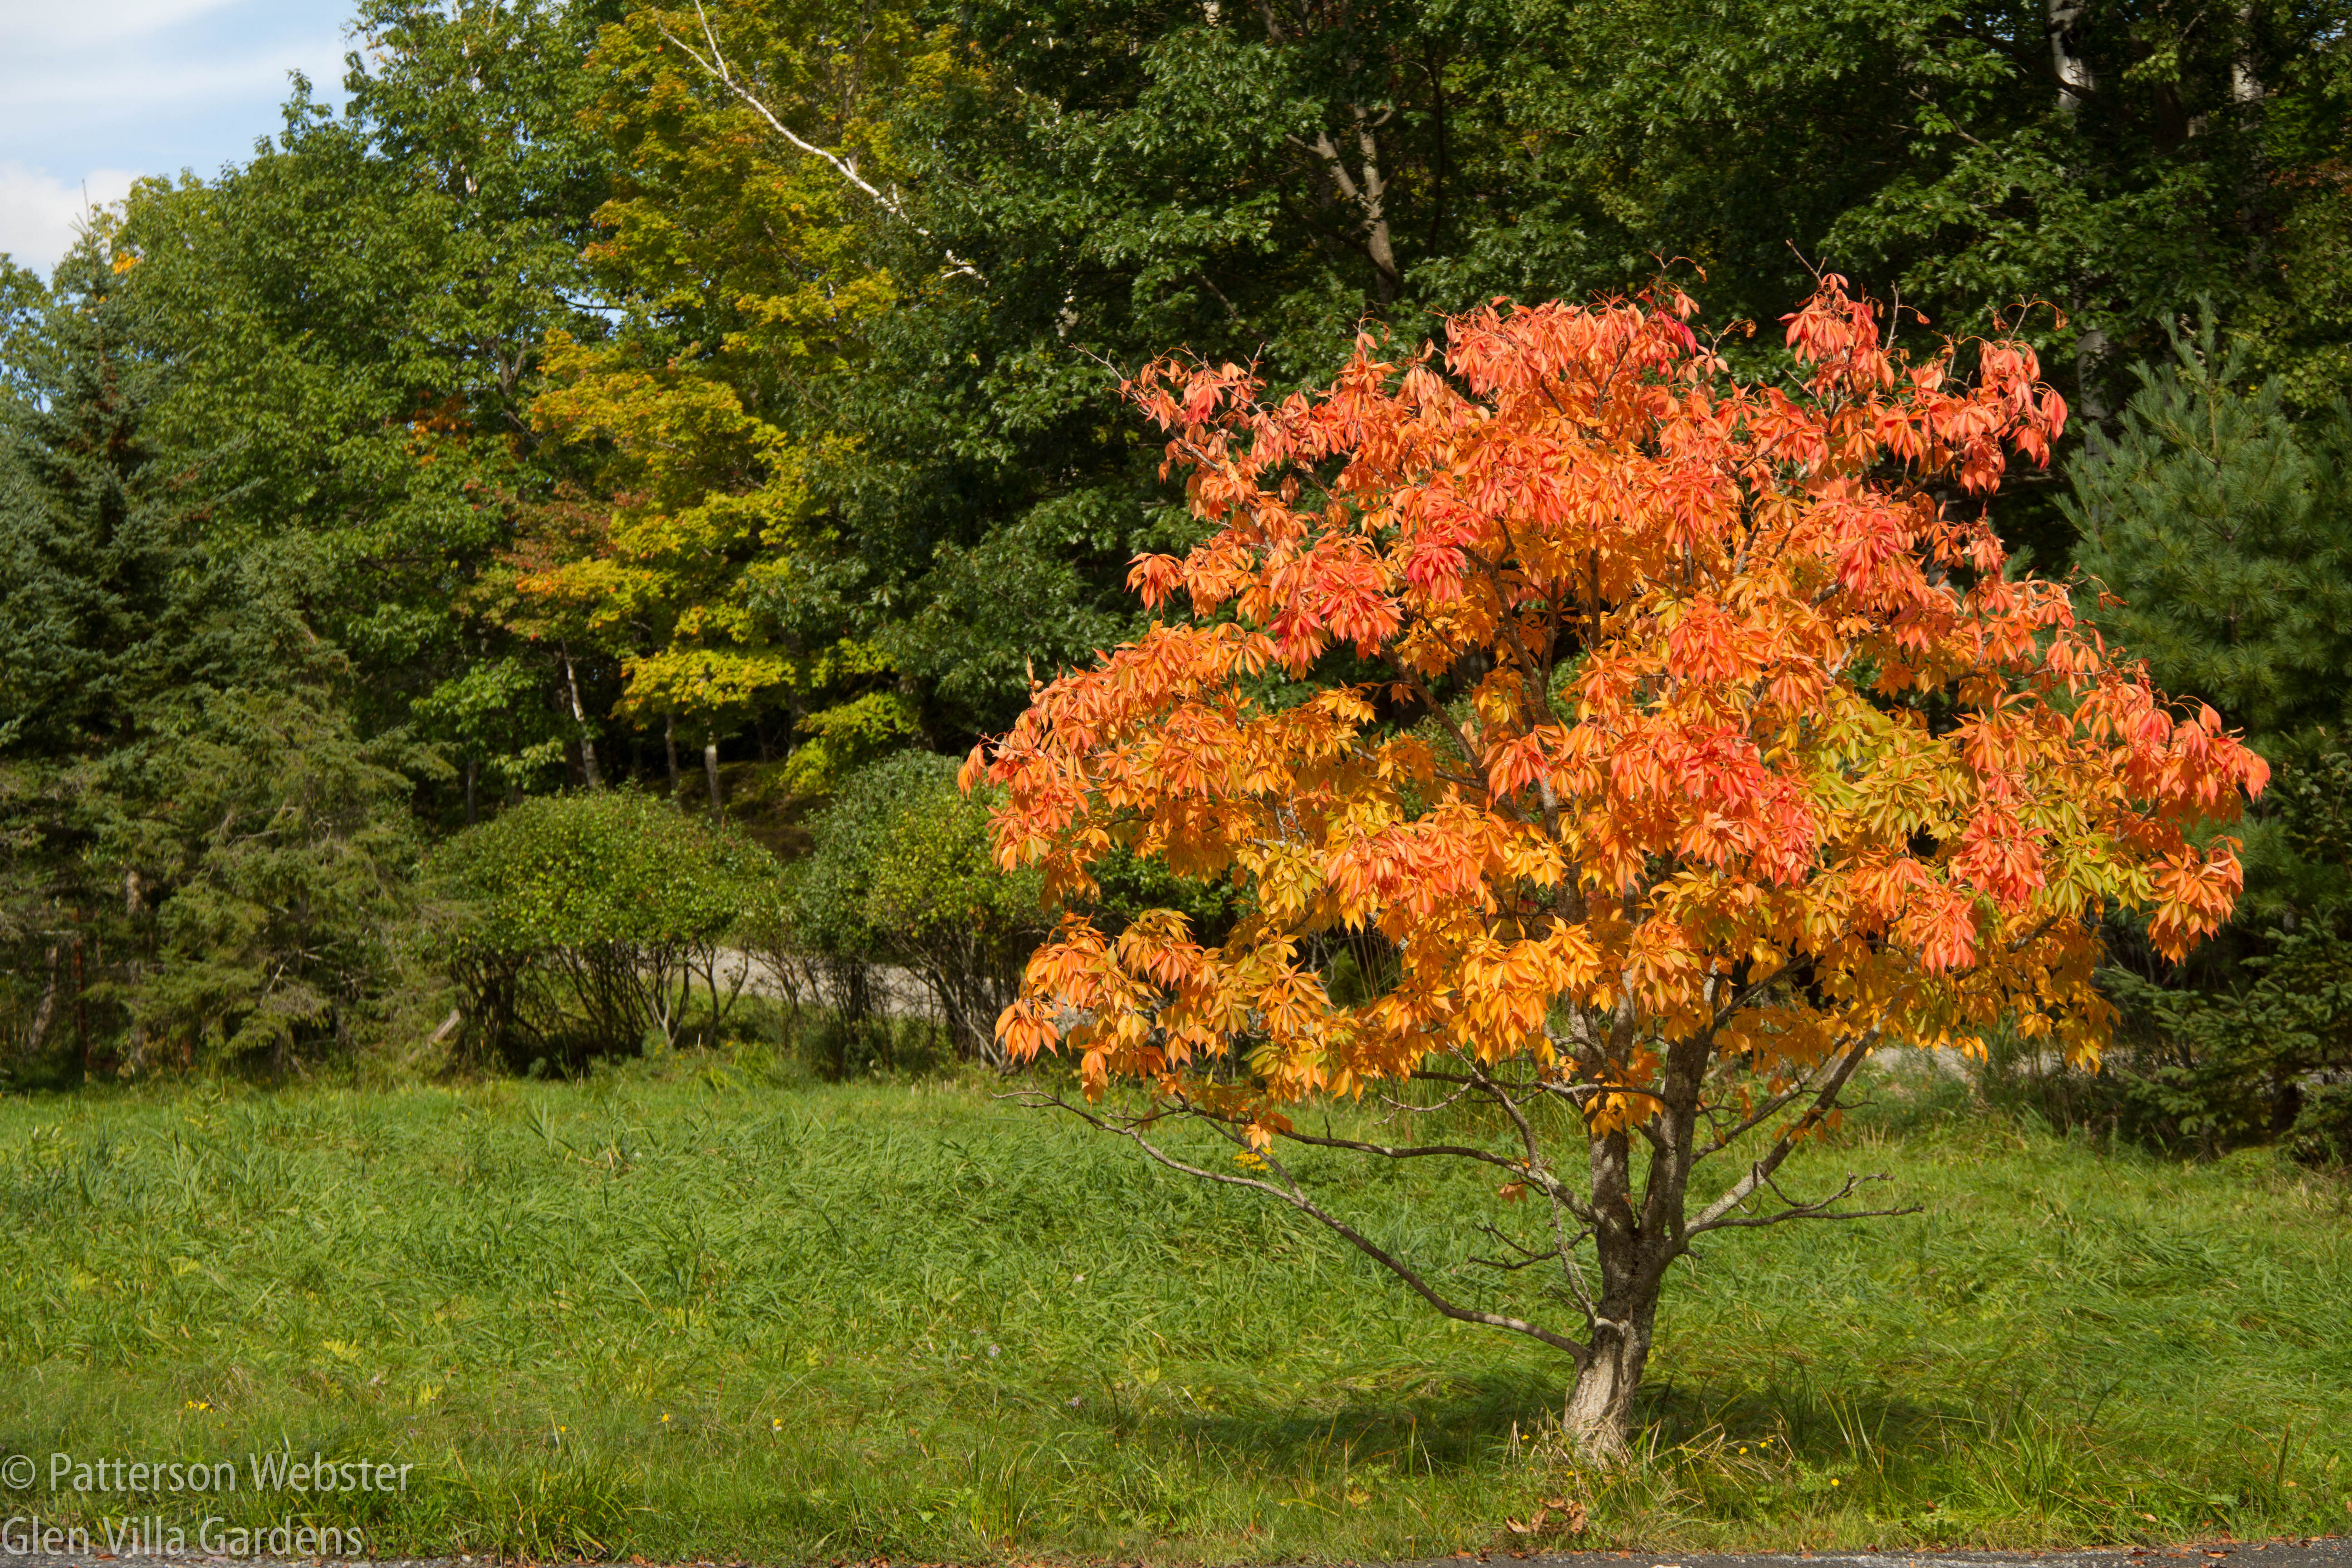 This tree is one of the first to change colour every year.